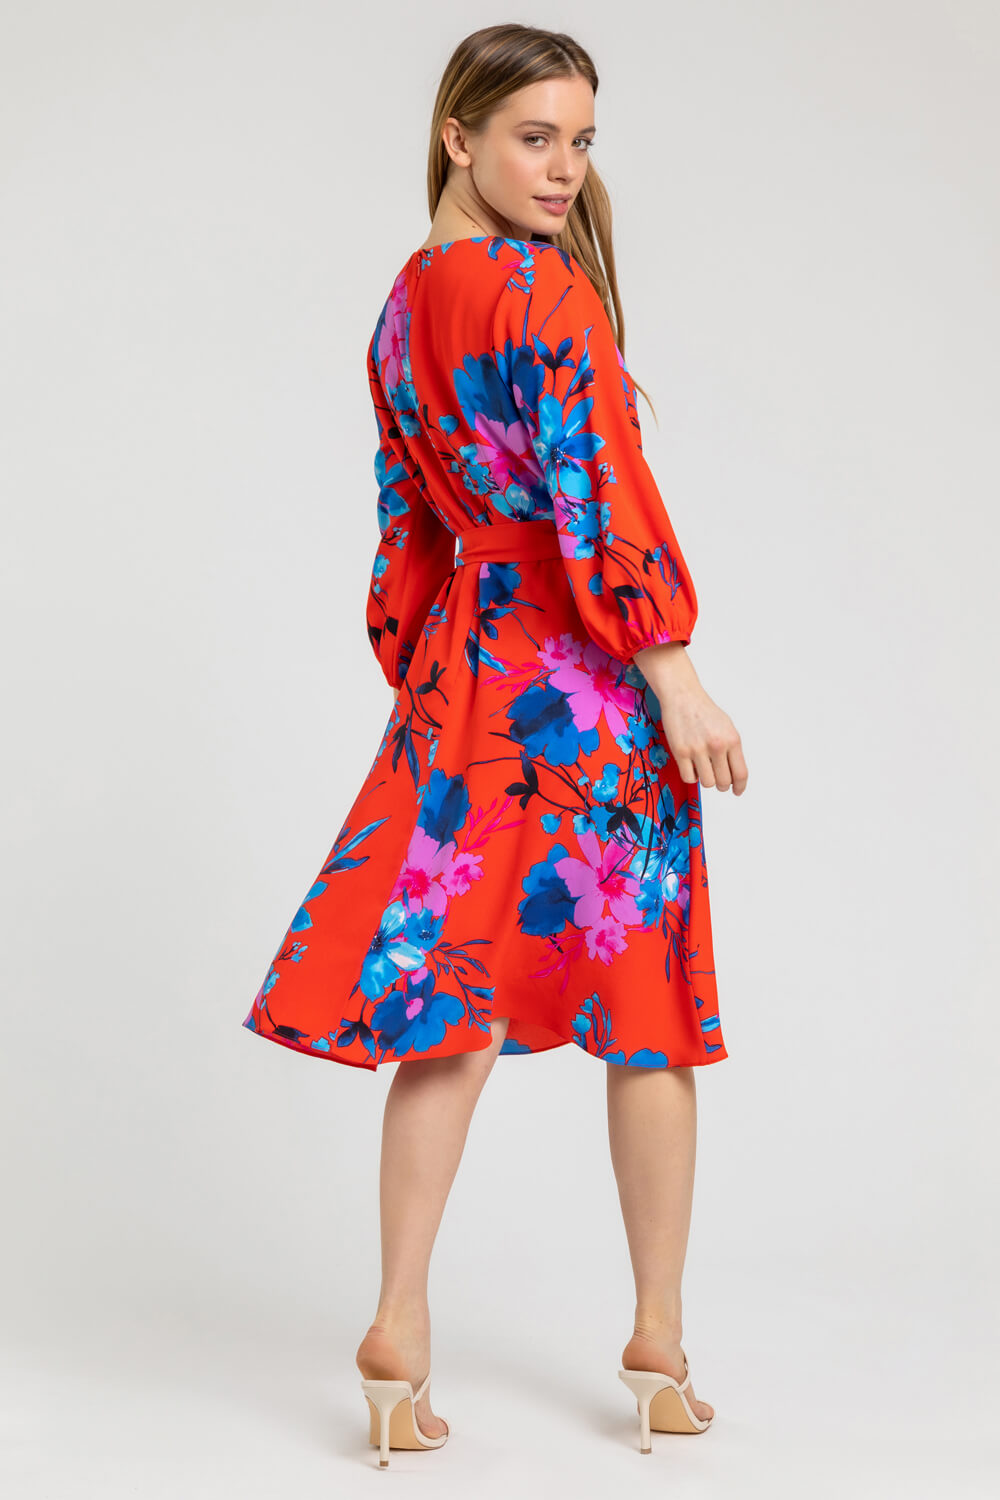 Petite Floral Fit & Flare Dress in Red | Roman UK